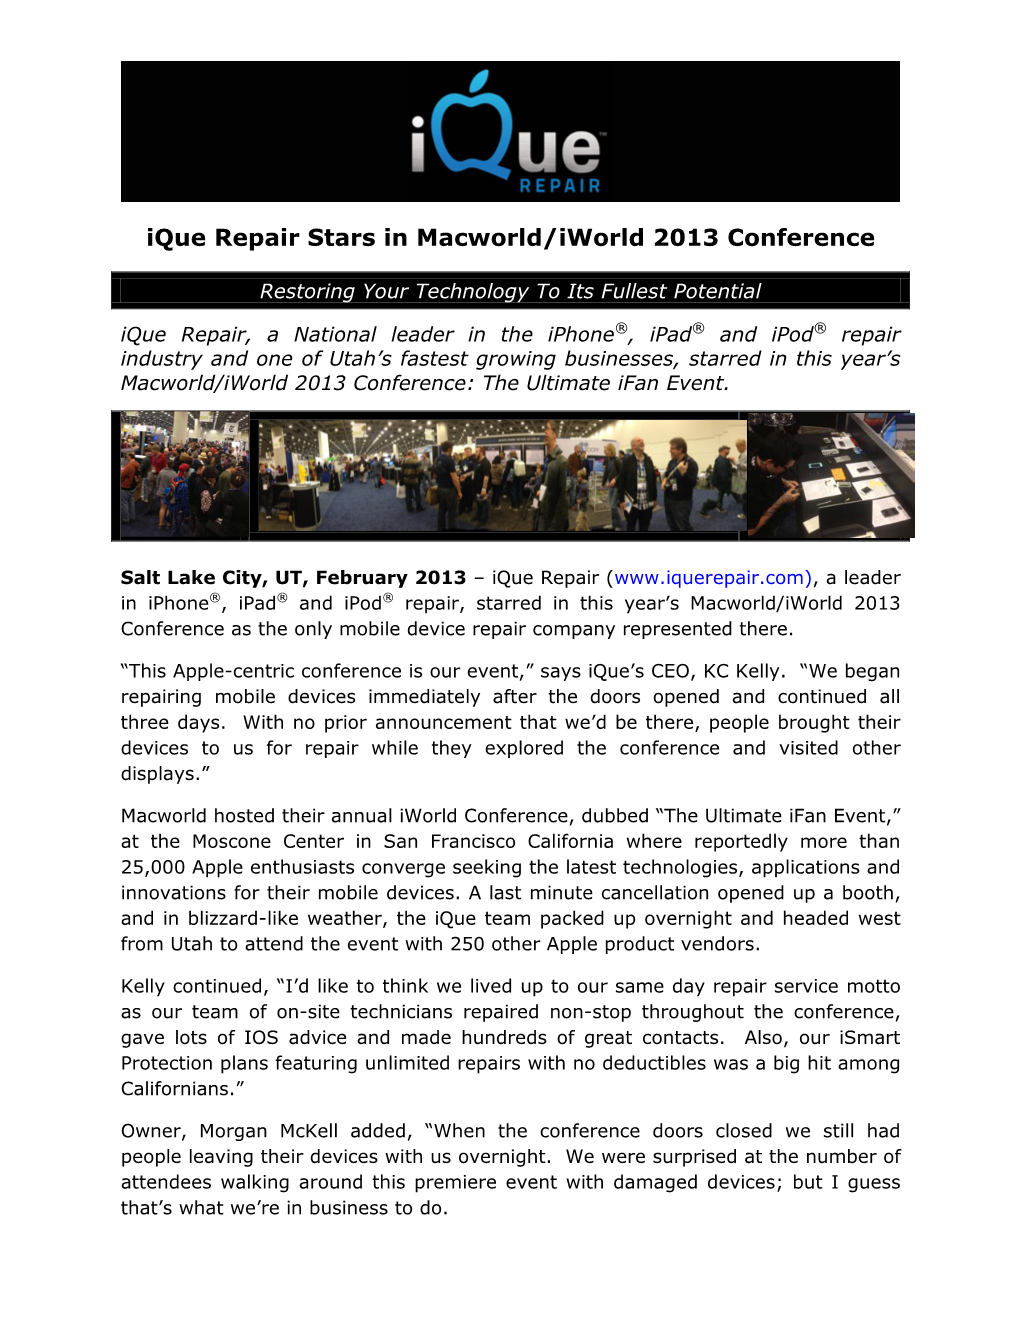 Ique Repair Stars in Macworld/Iworld 2013 Conference